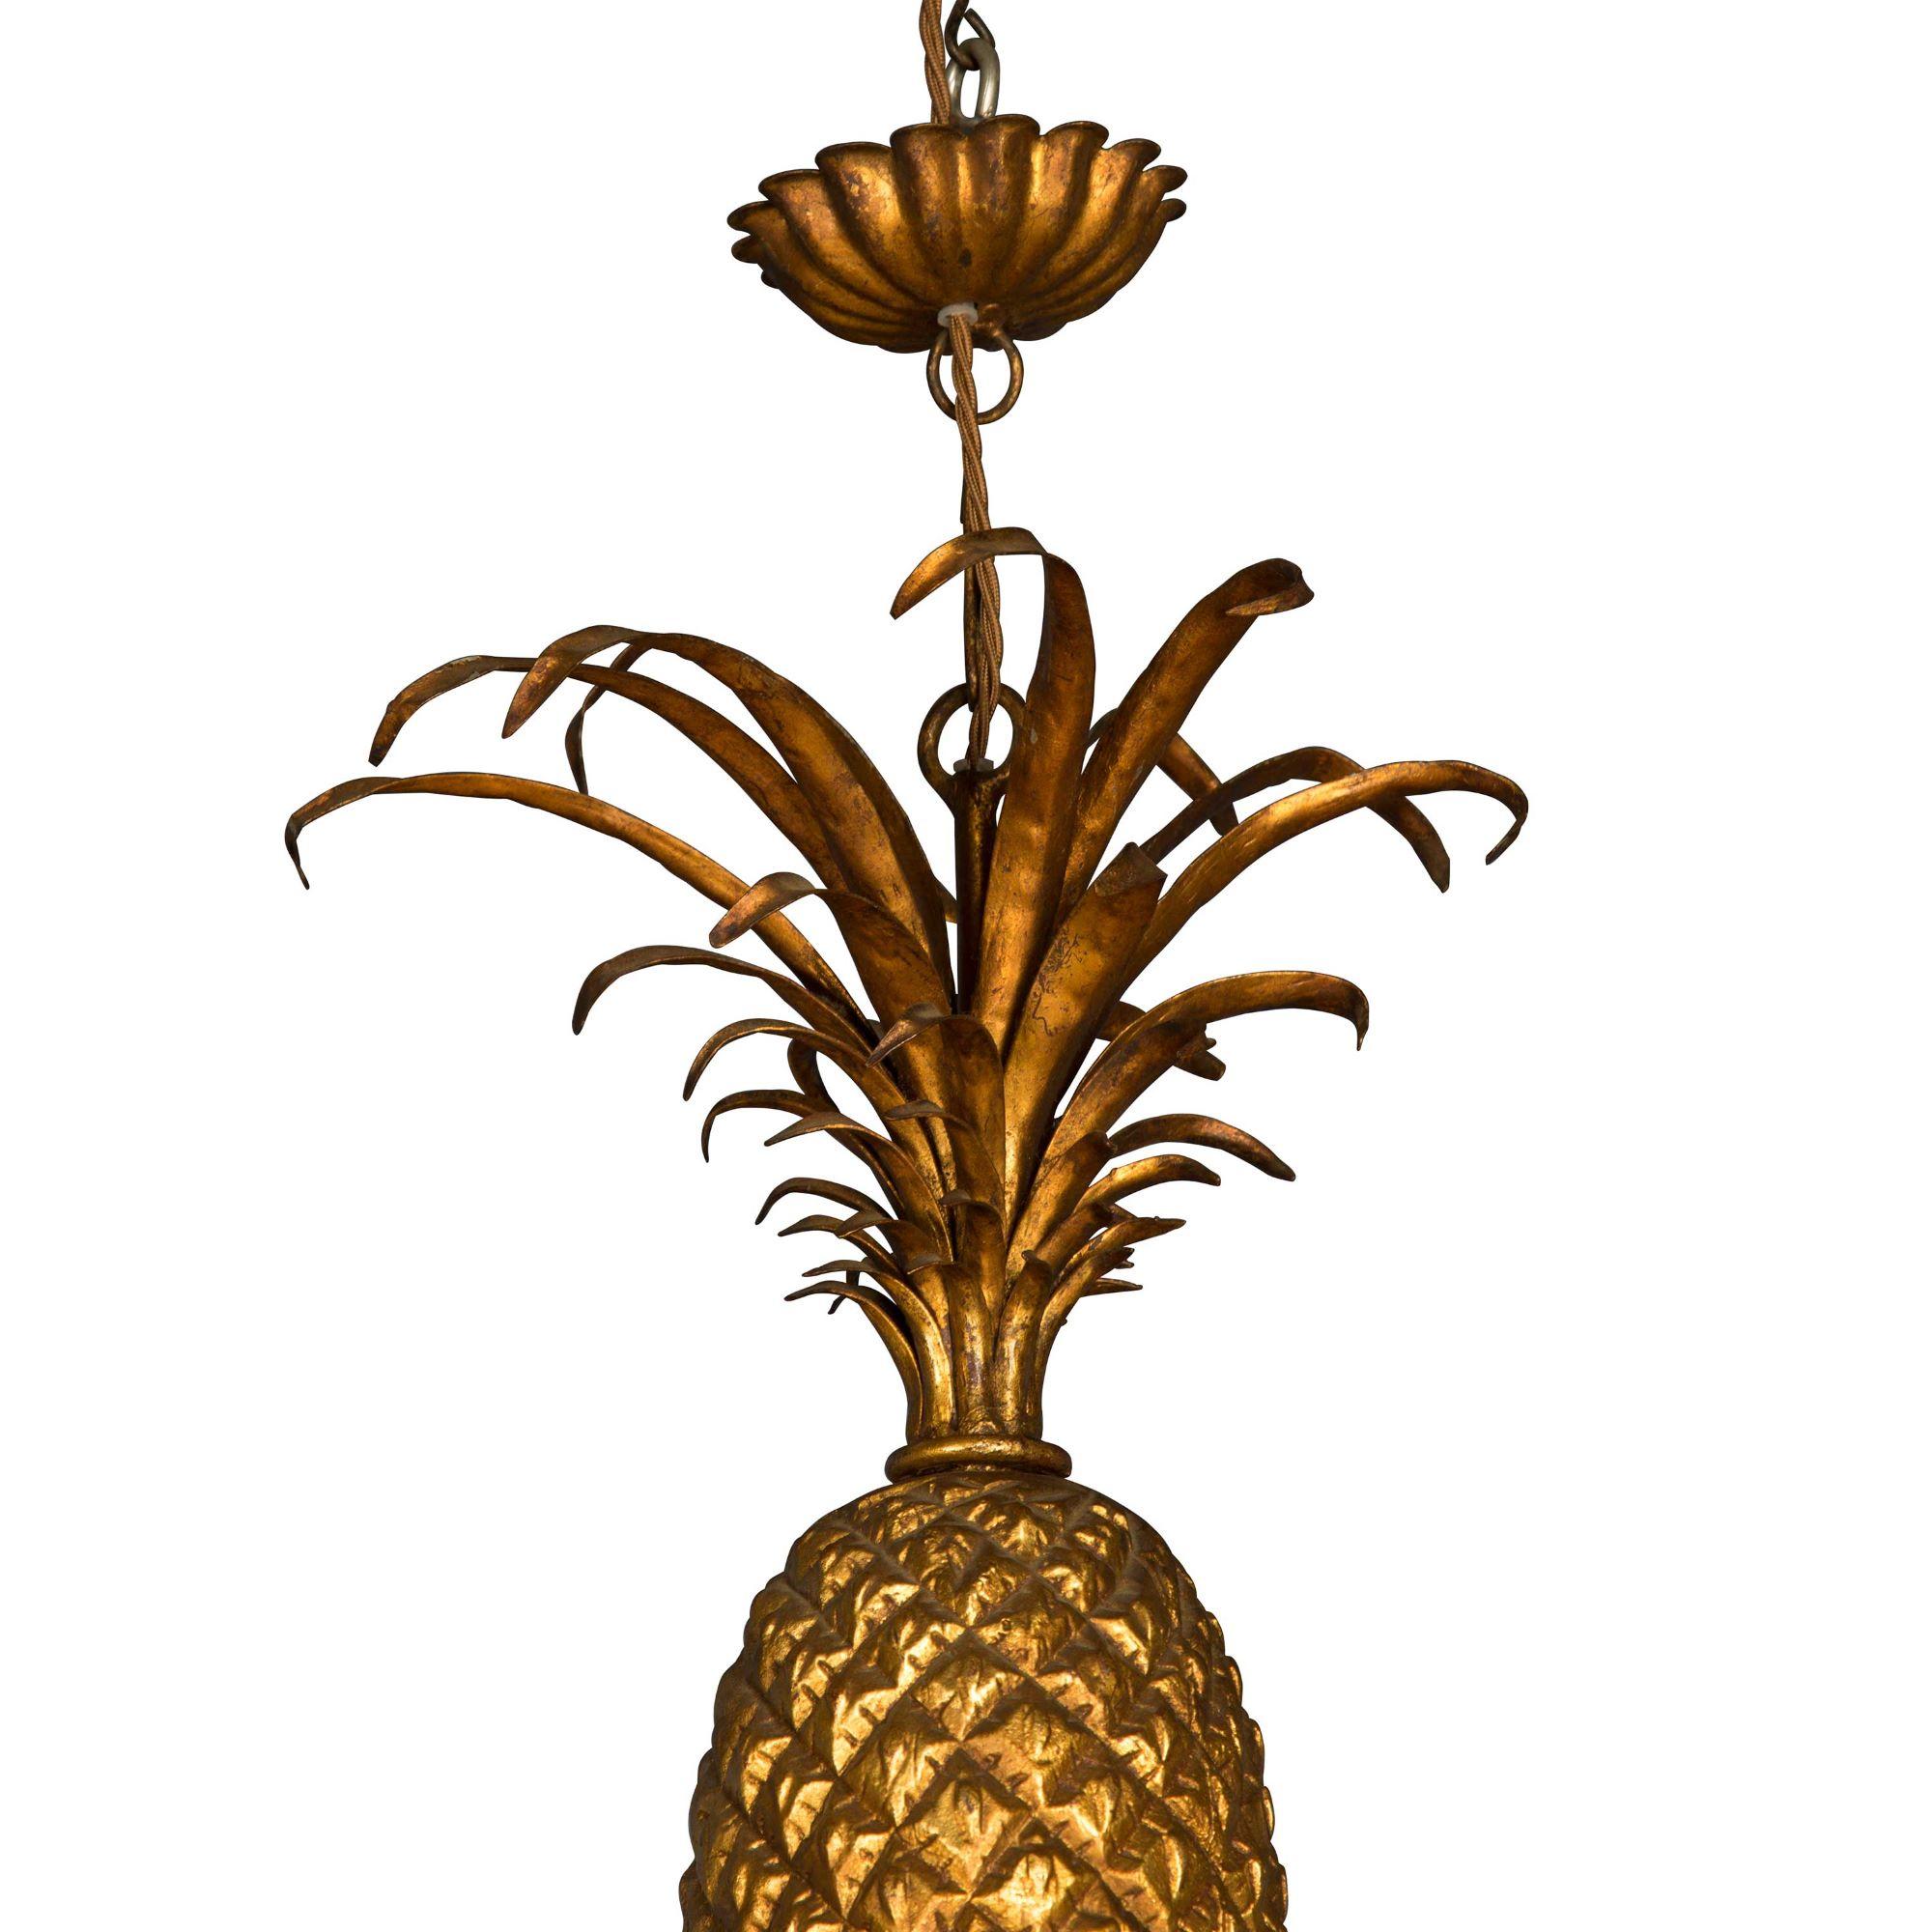 pineapple with arms